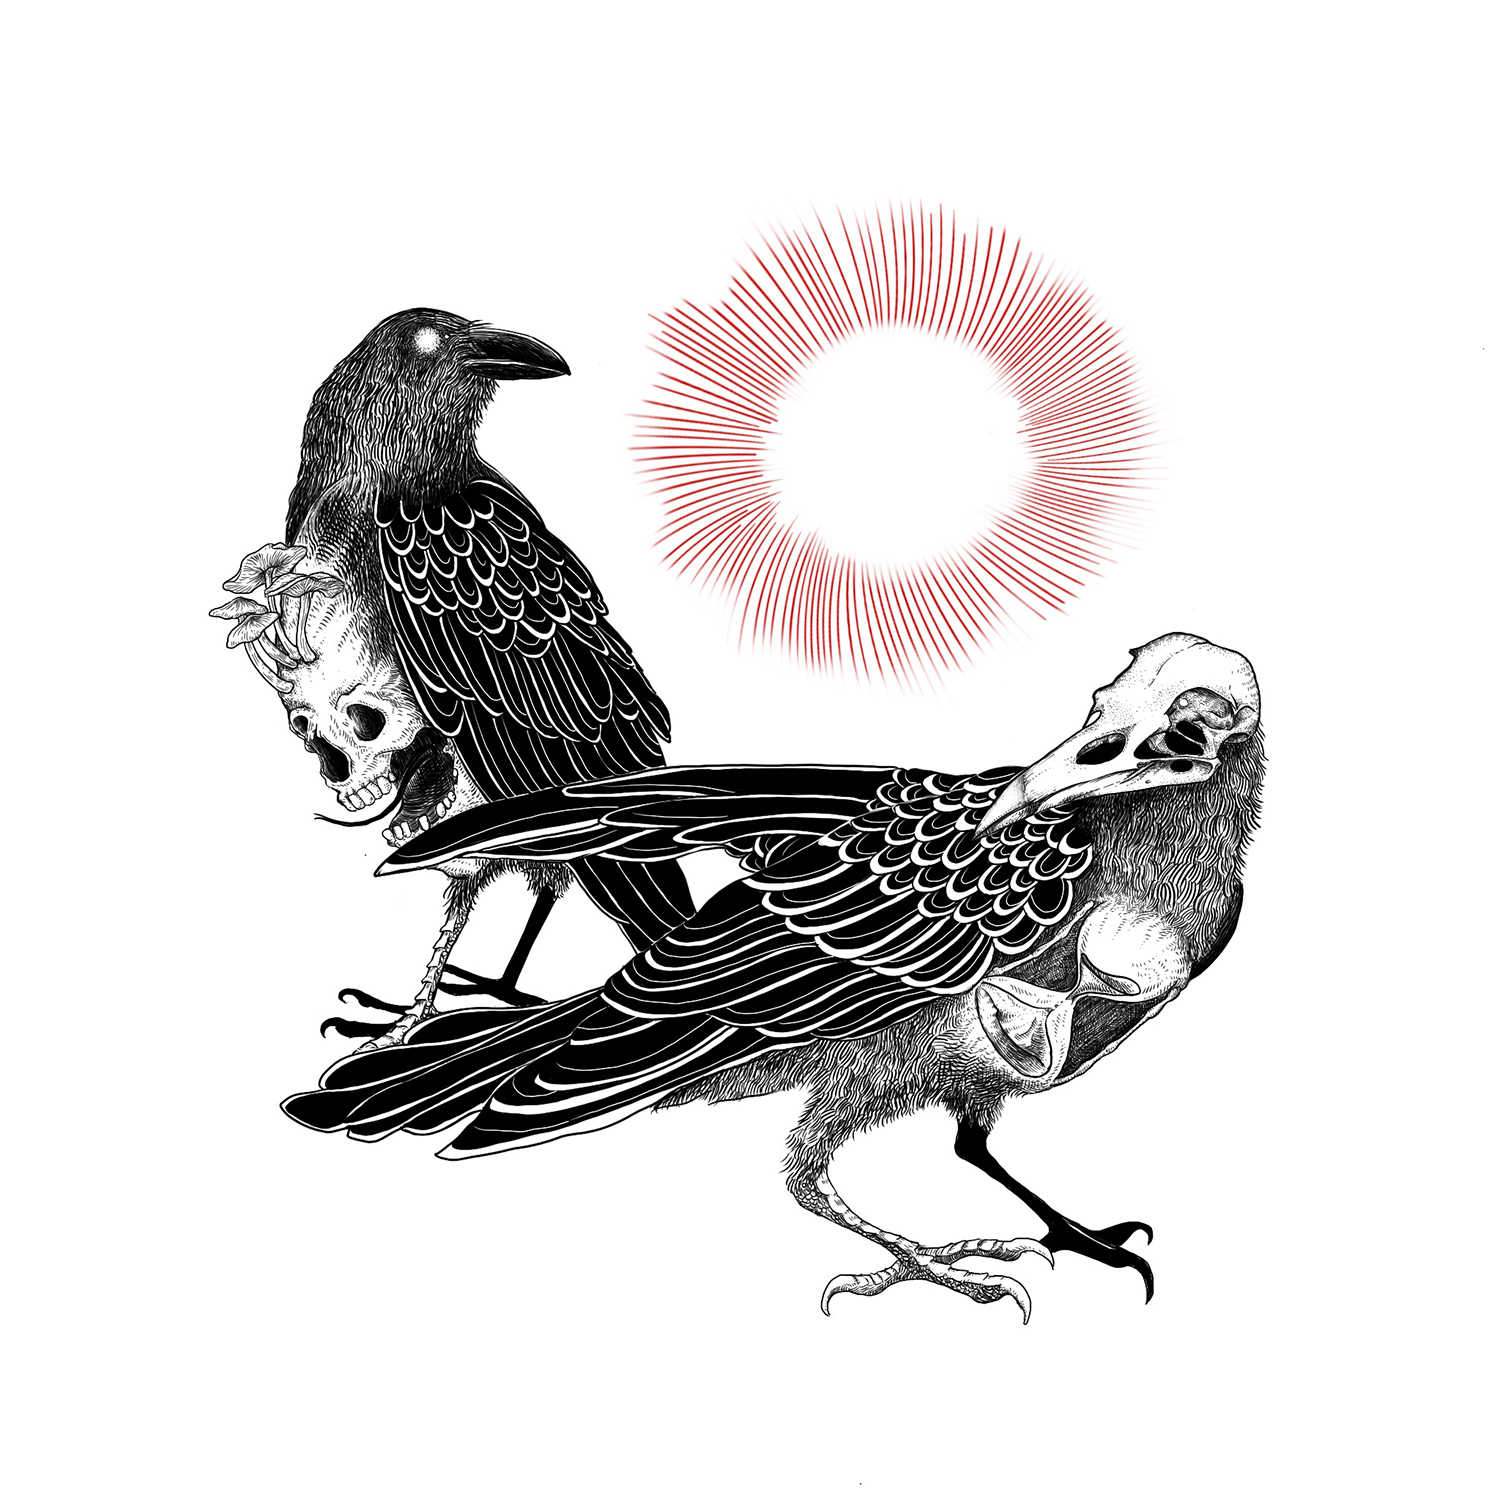 Illustration titles Death - two birds combined with skeletal forms